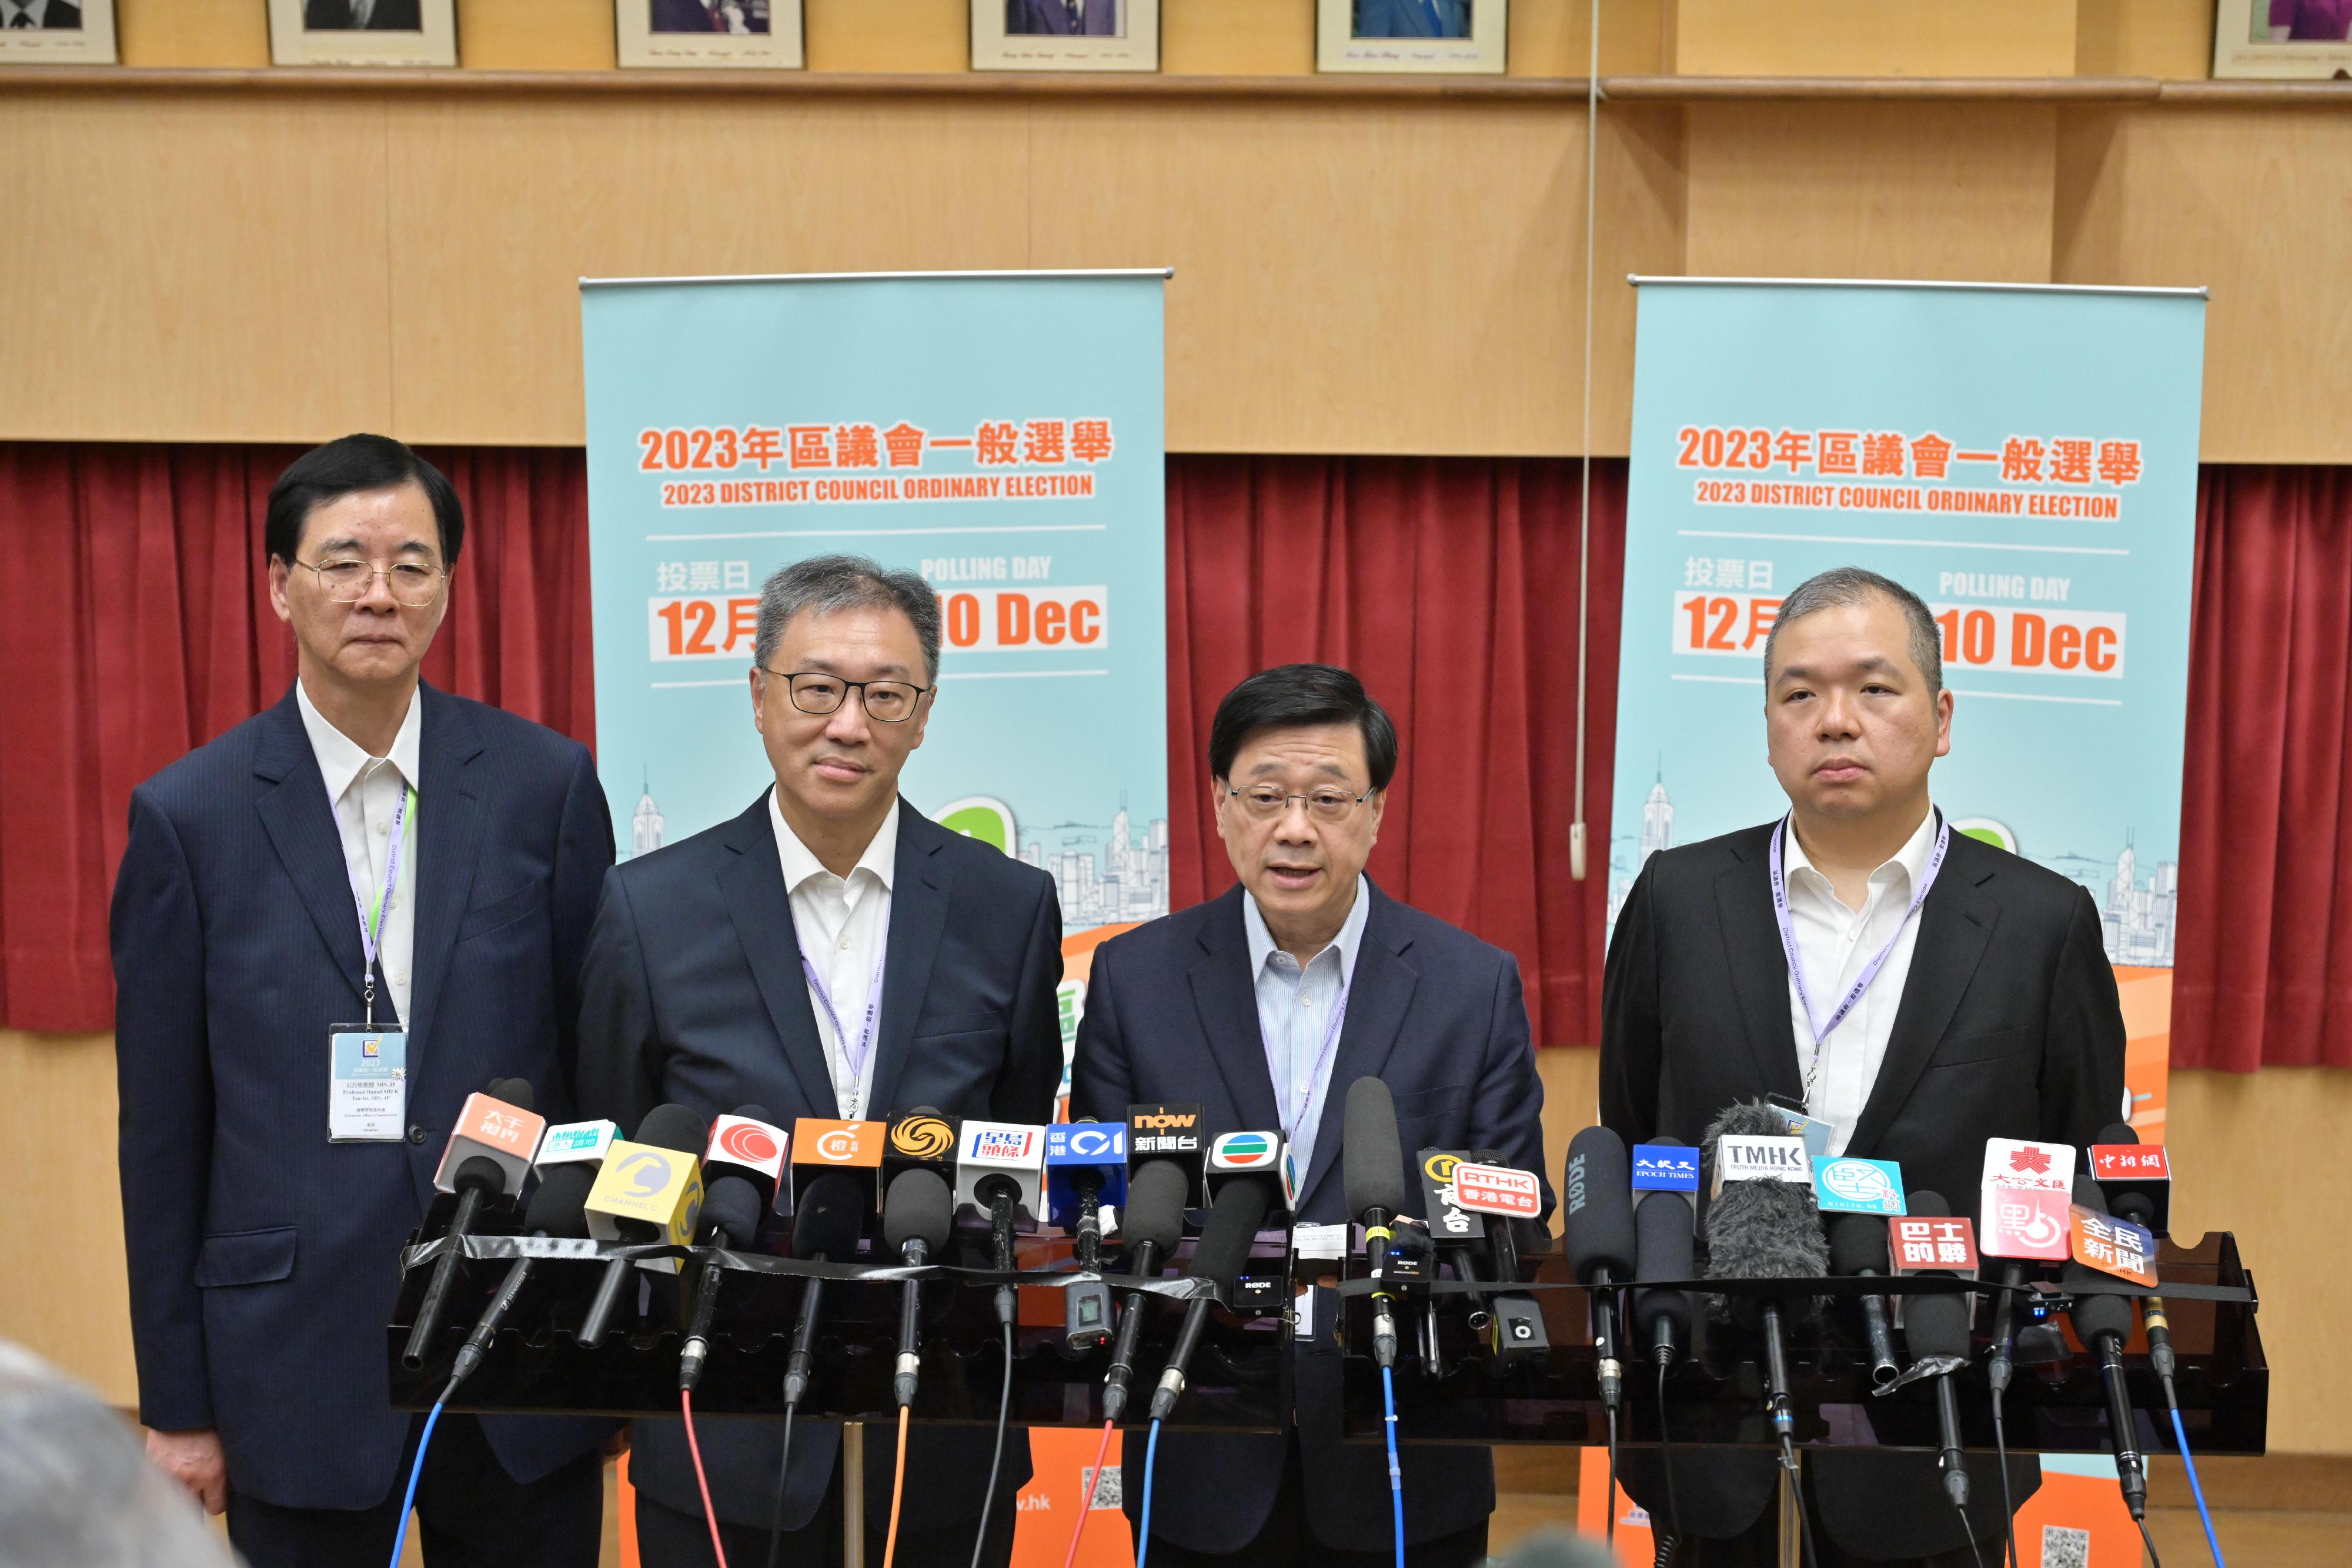 The Chief Executive, Mr John Lee (second right), together with the Chairman of the Electoral Affairs Commission (EAC), Mr Justice David Lok (second left); the EAC members Professor Daniel Shek (first left) and Mr Bernard Man, SC (first right), meet the media after visiting the polling station of 2023 District Council Ordinary Election at Queen's College early this morning (December 11).  